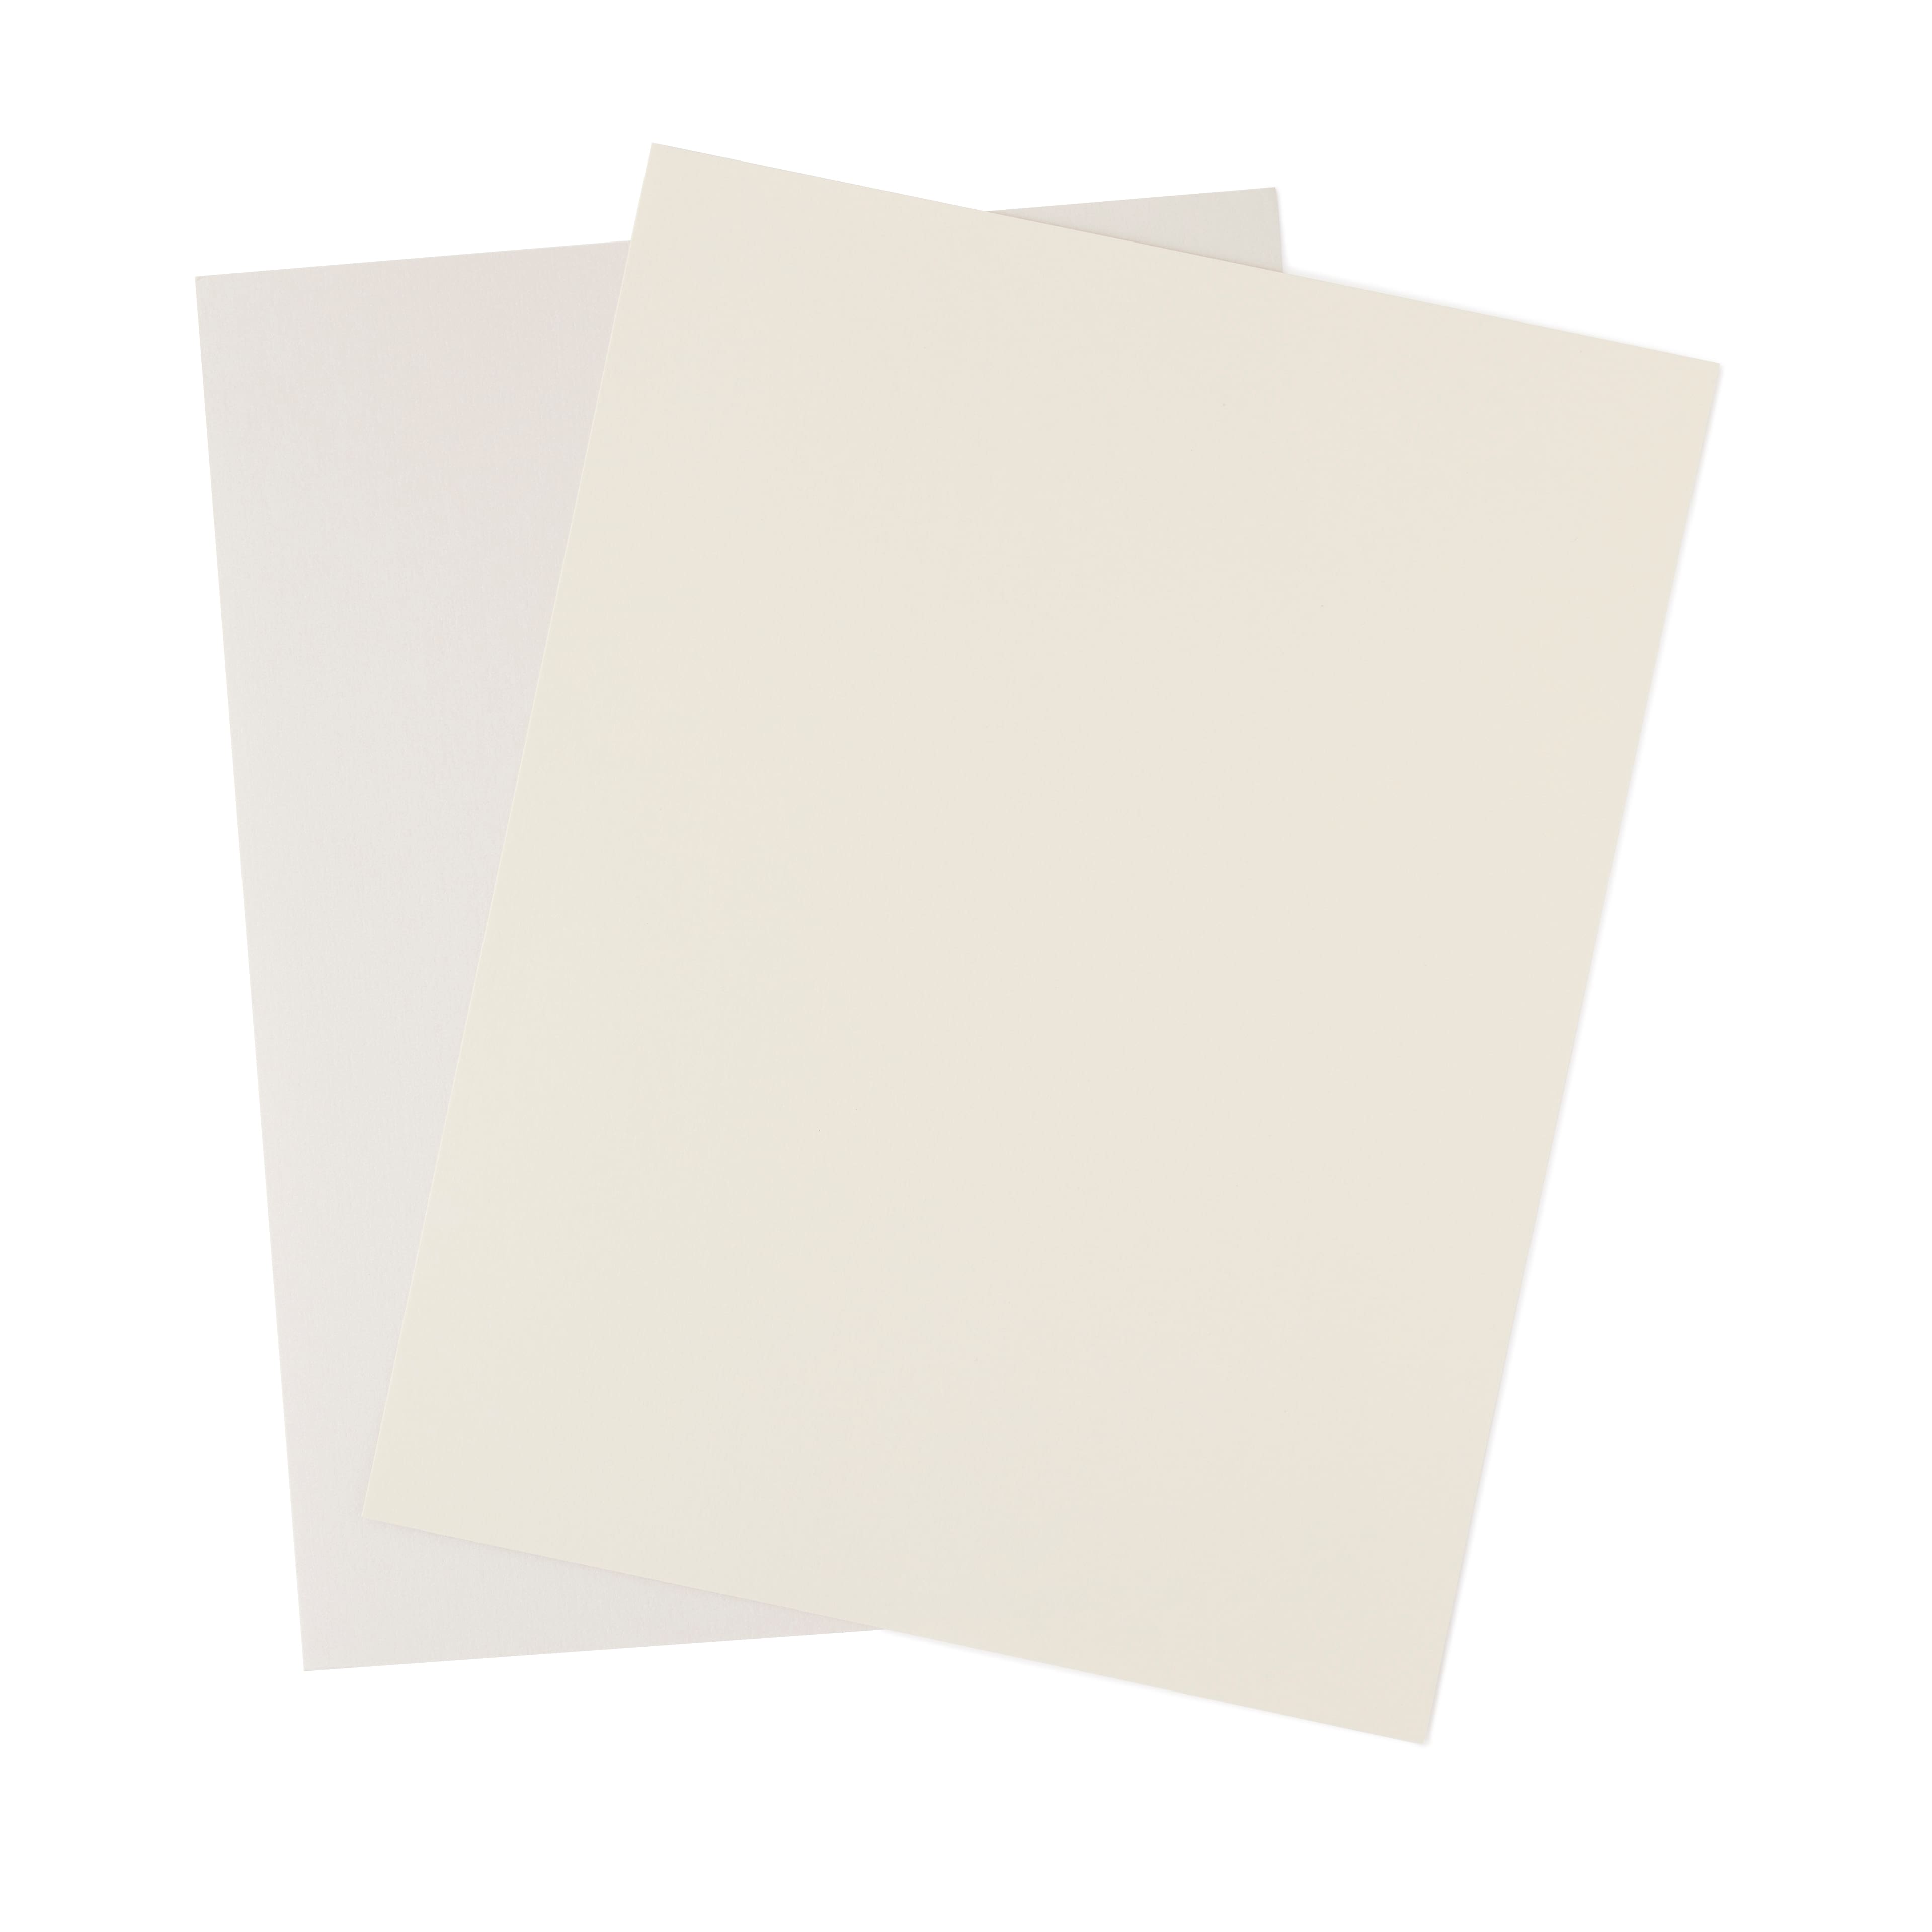 Silver Shimmer 8.5 x 11 Cardstock Paper by Recollections™, 100 Sheets